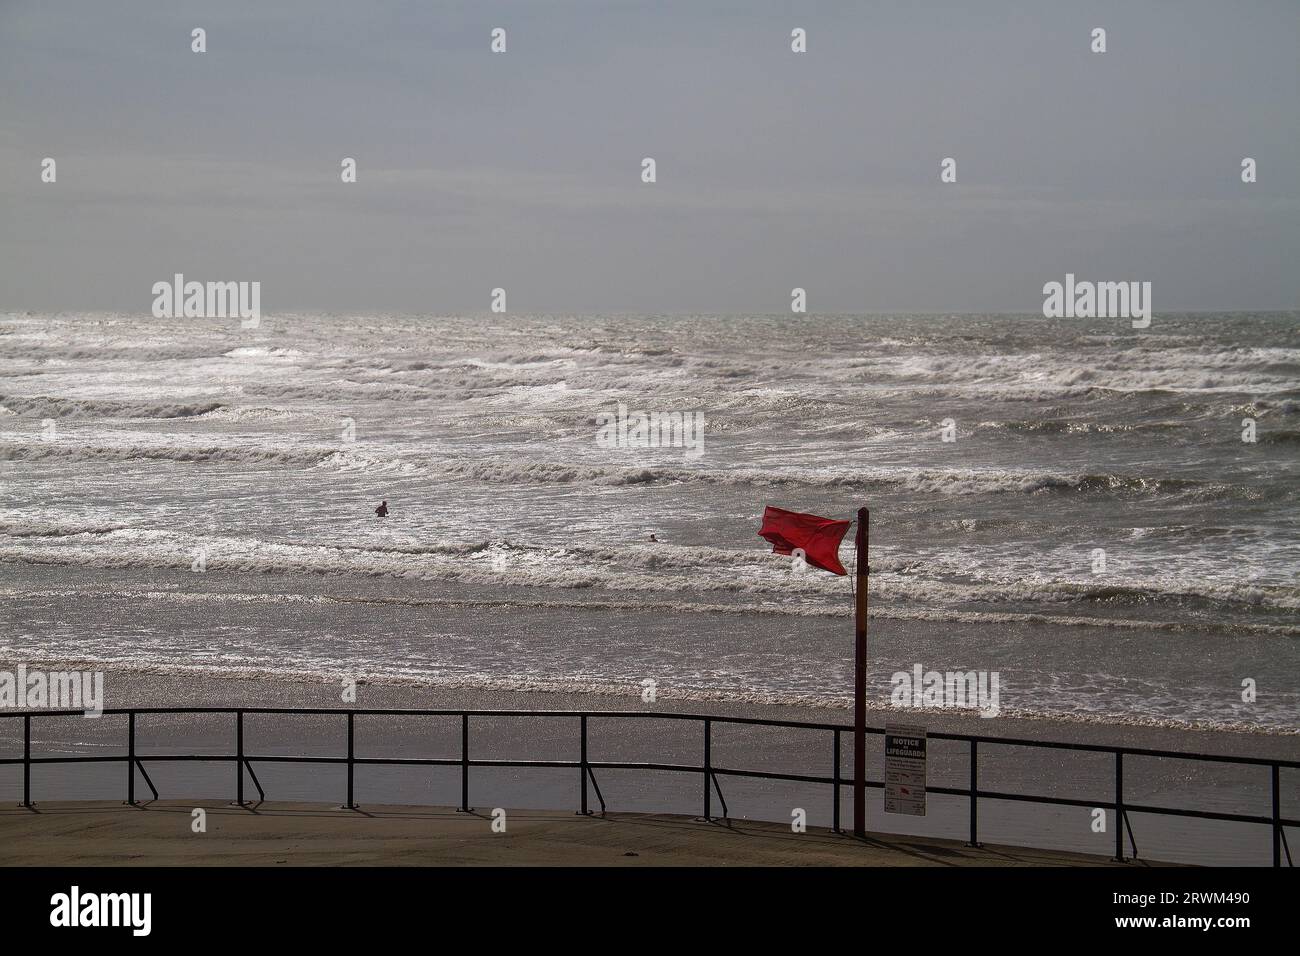 Two people in the distance in a rough sea, ignoring a red flag warning of danger, dark sea reflecting last sunlight Stock Photo